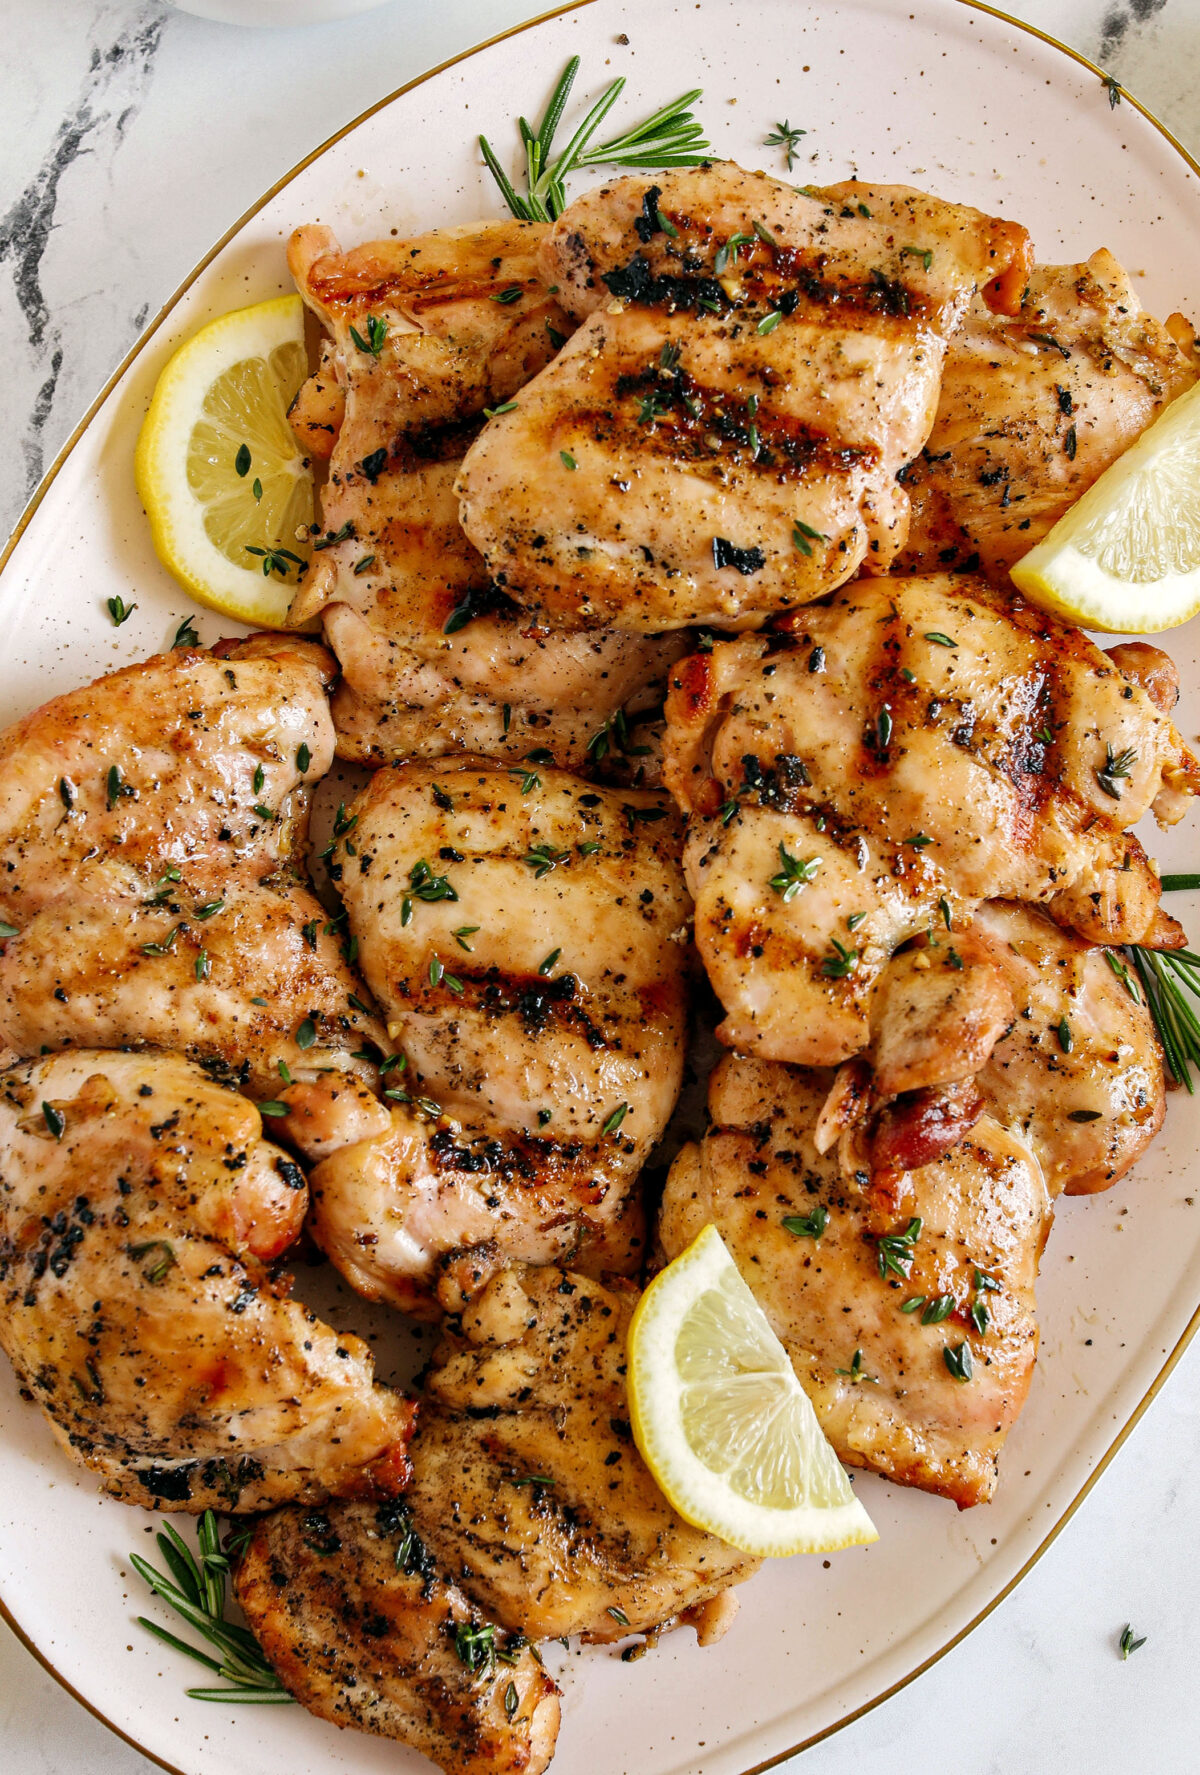 This Lemon Herb Grilled Chicken is easily made with just a few simple ingredients for a delicious, healthy meal!  Packed with so much flavor thanks to tangy lemon juice, tons of garlic, and fresh thyme!